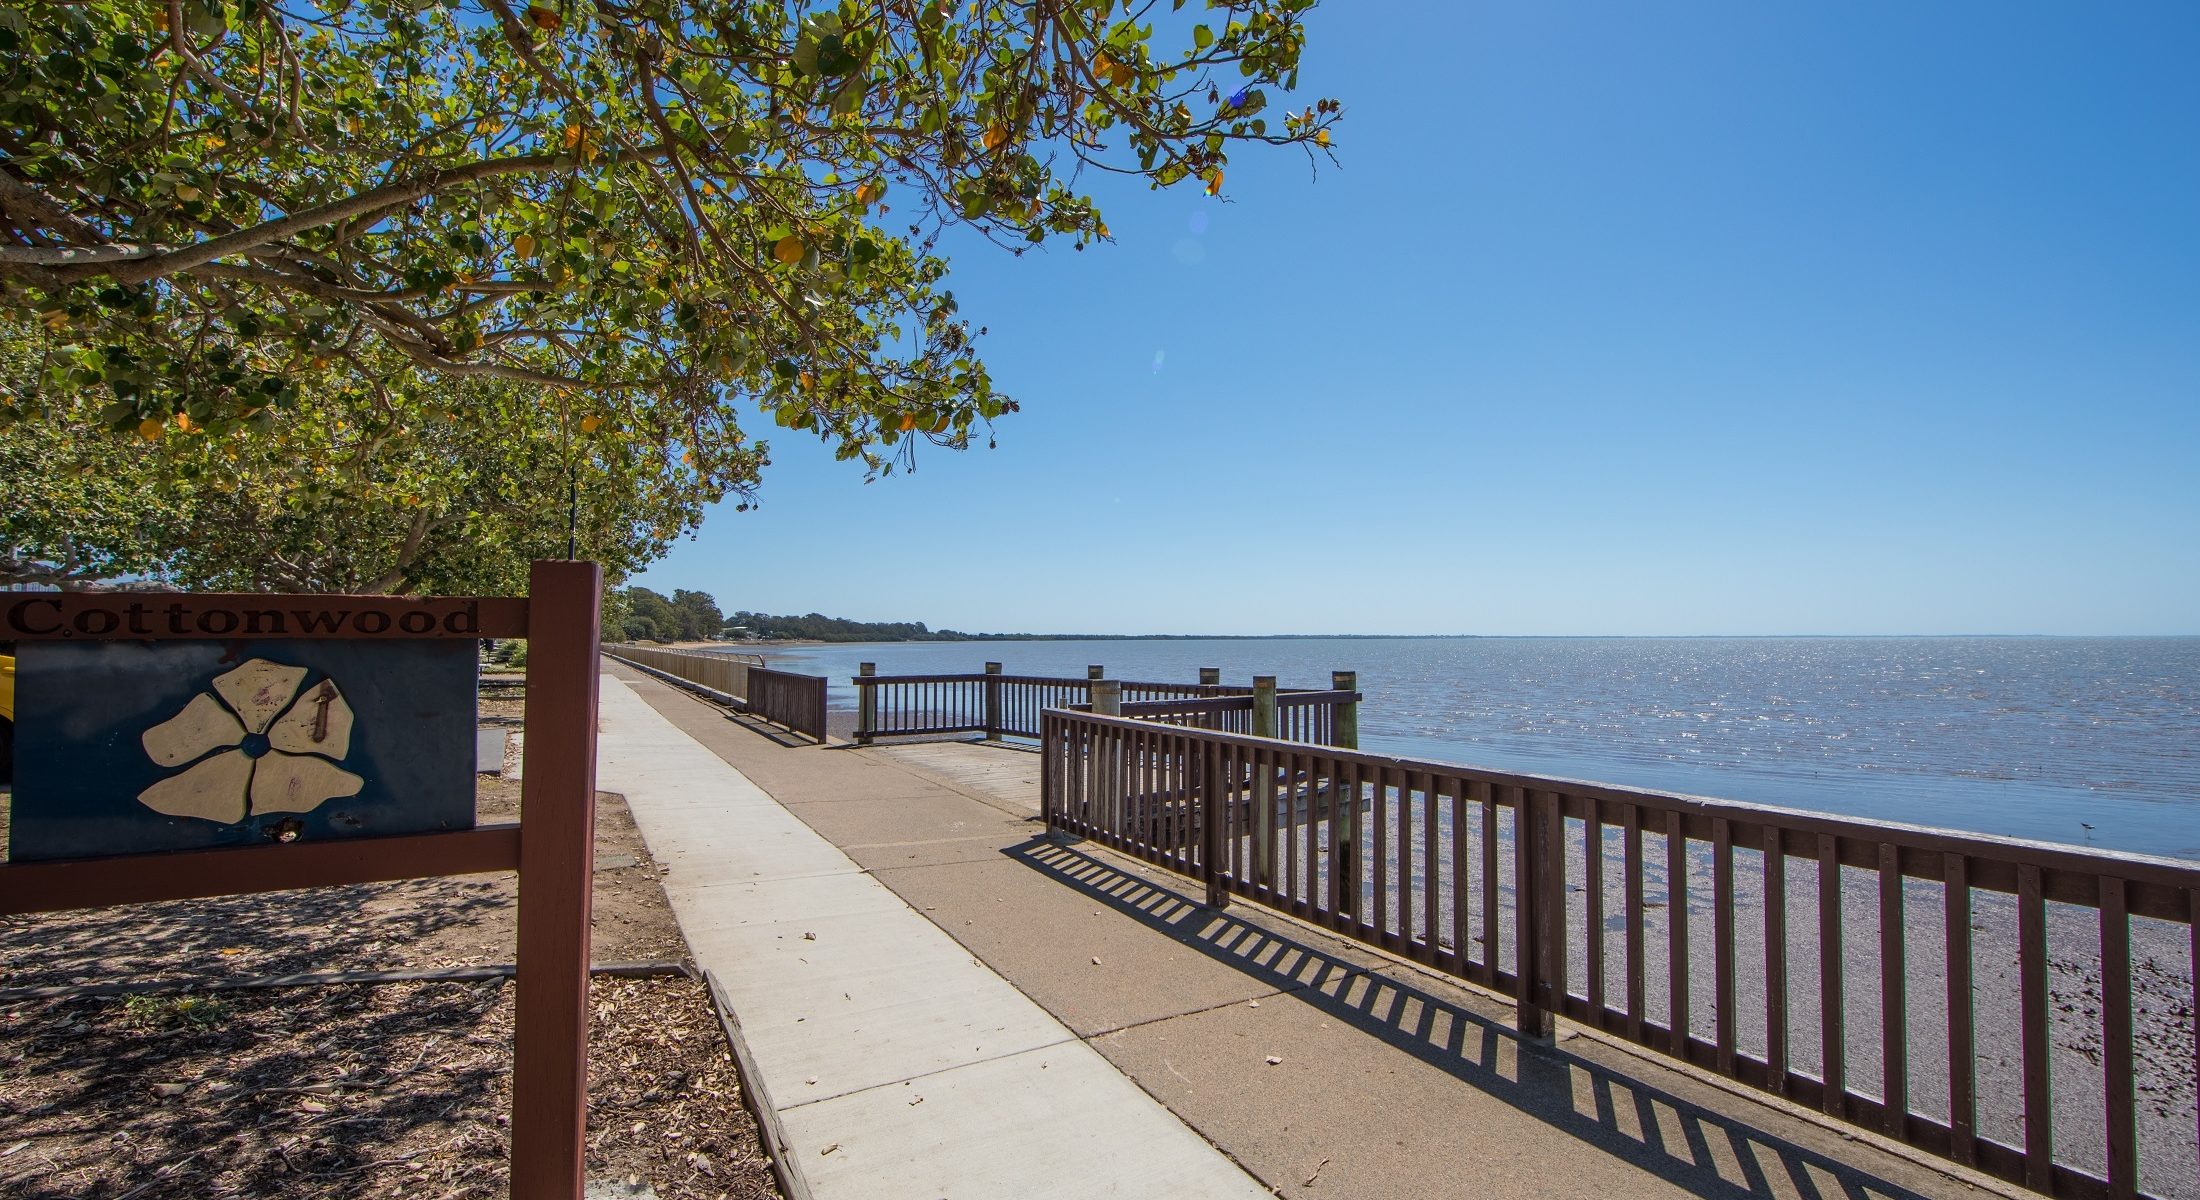 An accessible pathway runs along the Deception Bay Foreshore which overlooks the Moreton Bay Marine Park